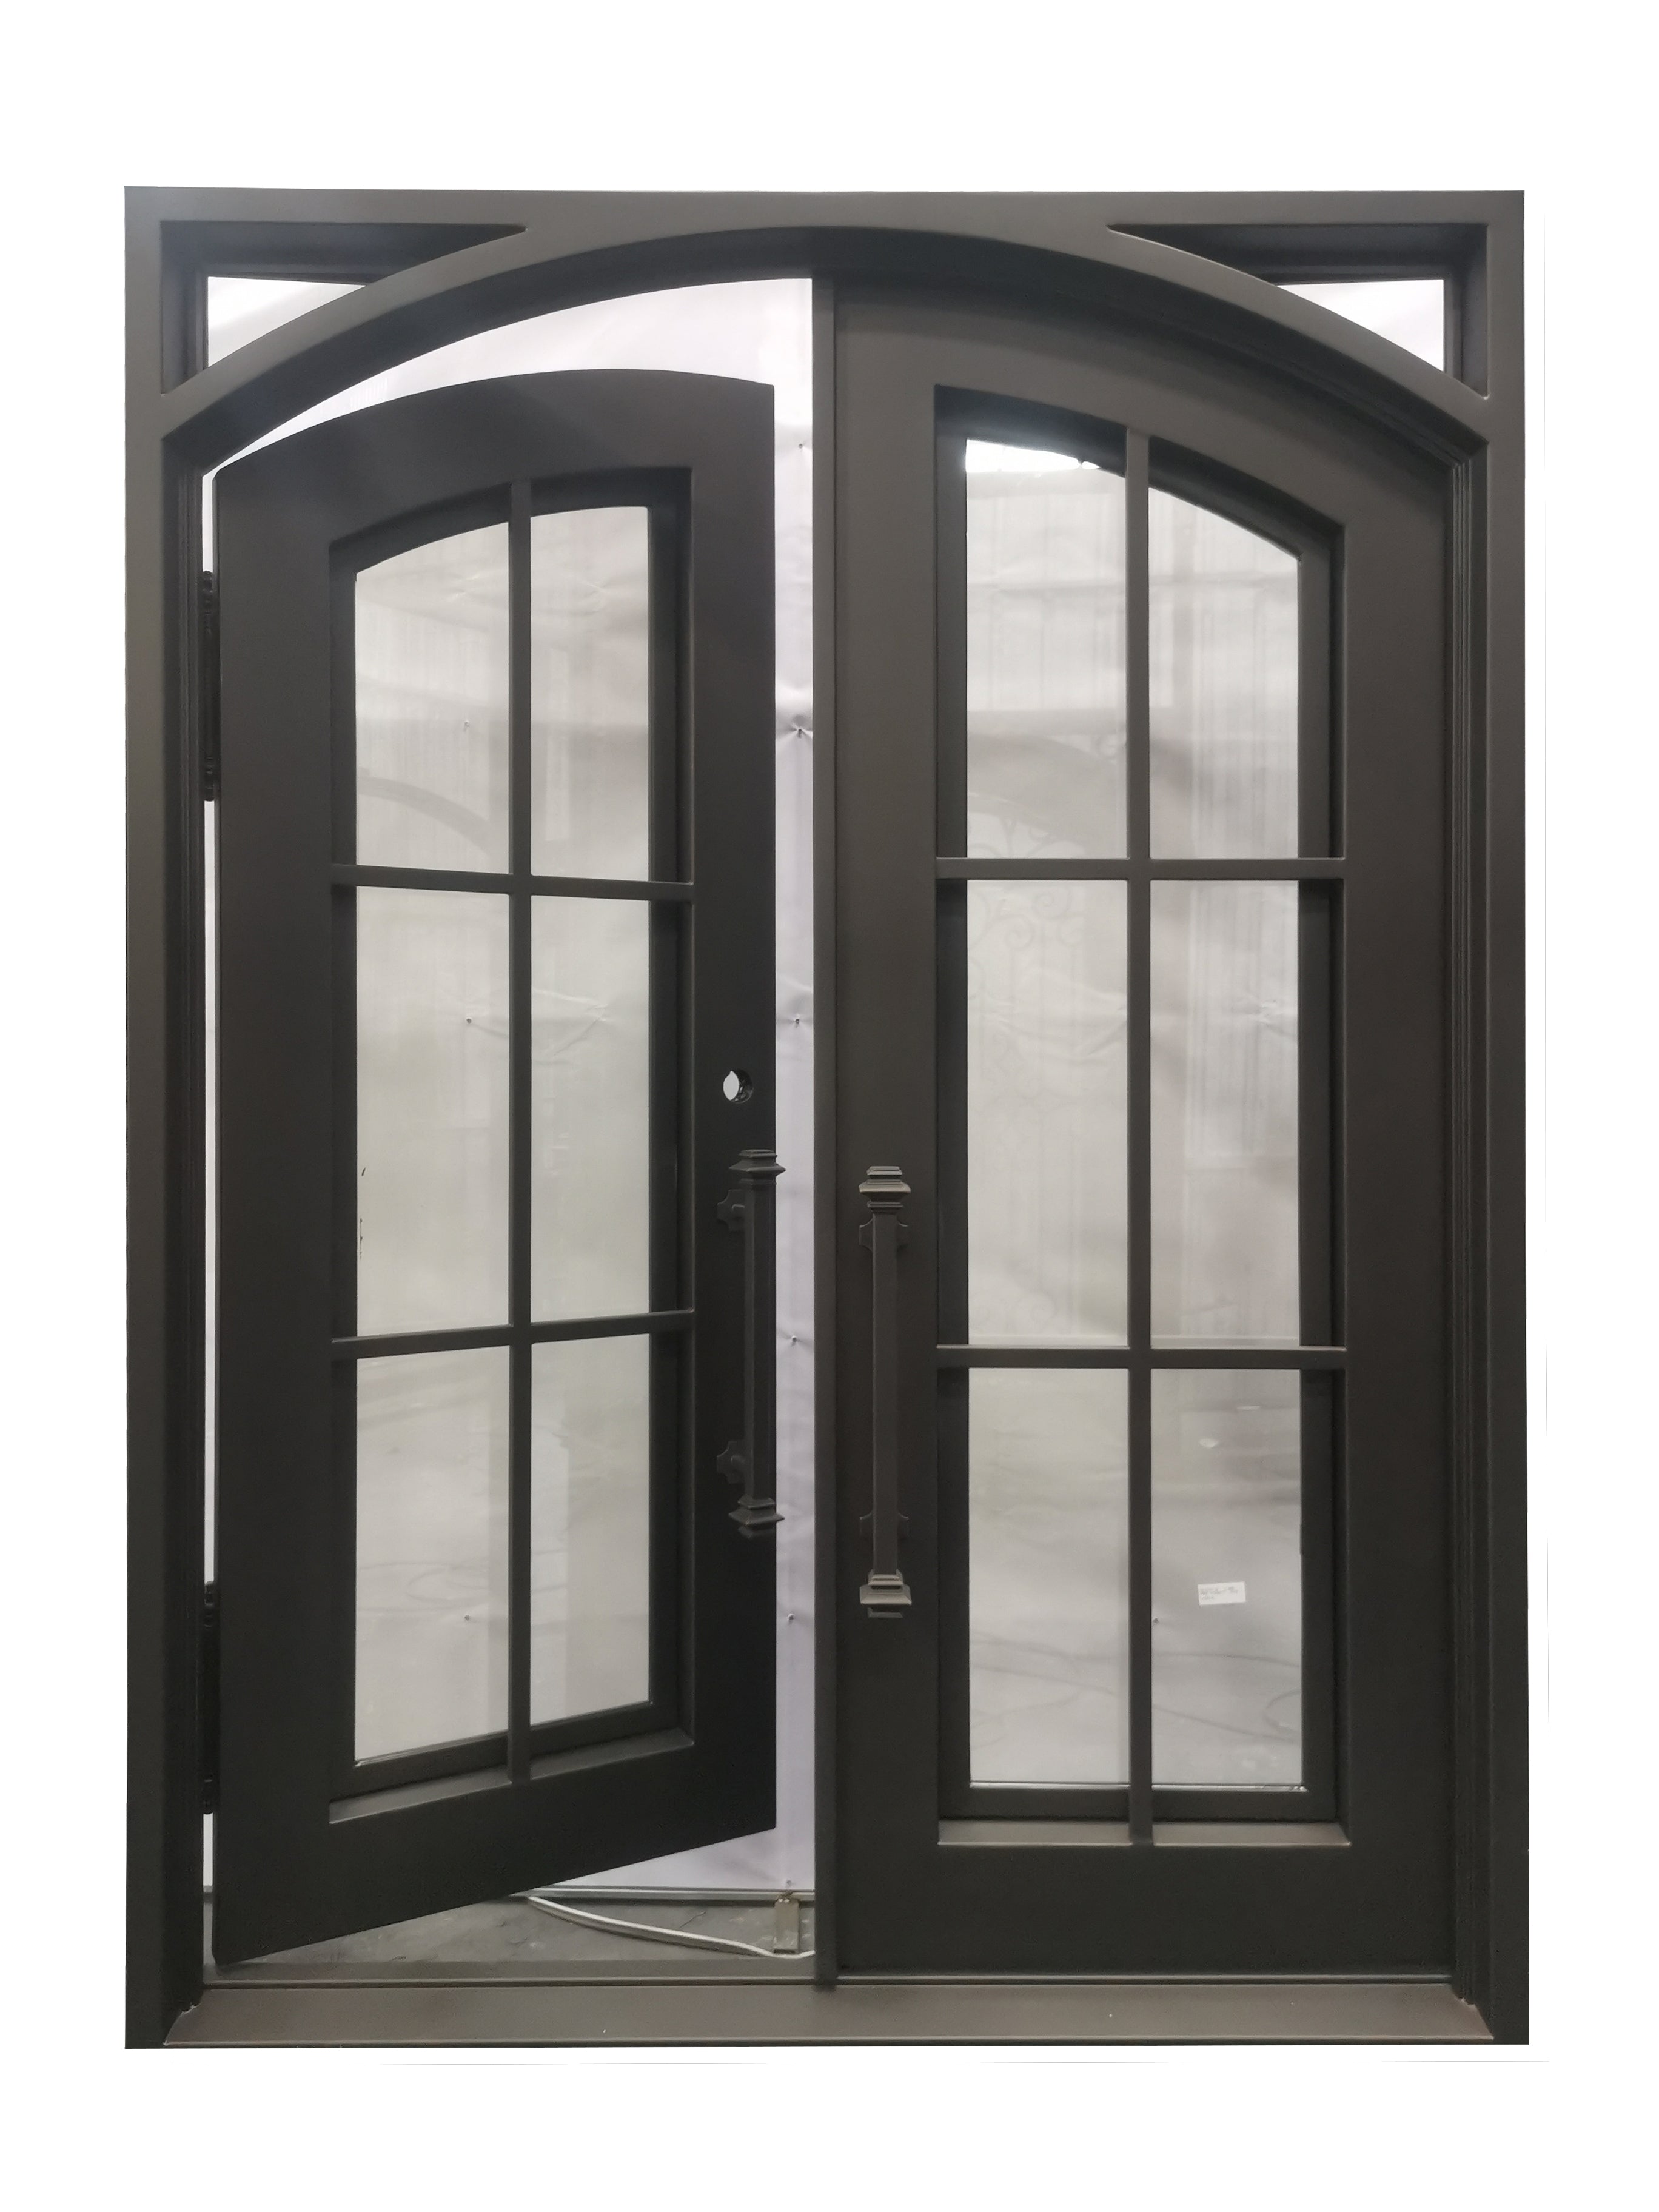 Covington Model Double Front Entry Iron Door With Tempered Low E Clear Glass Dark Bronze Finish - AAWAIZ IMPORTS